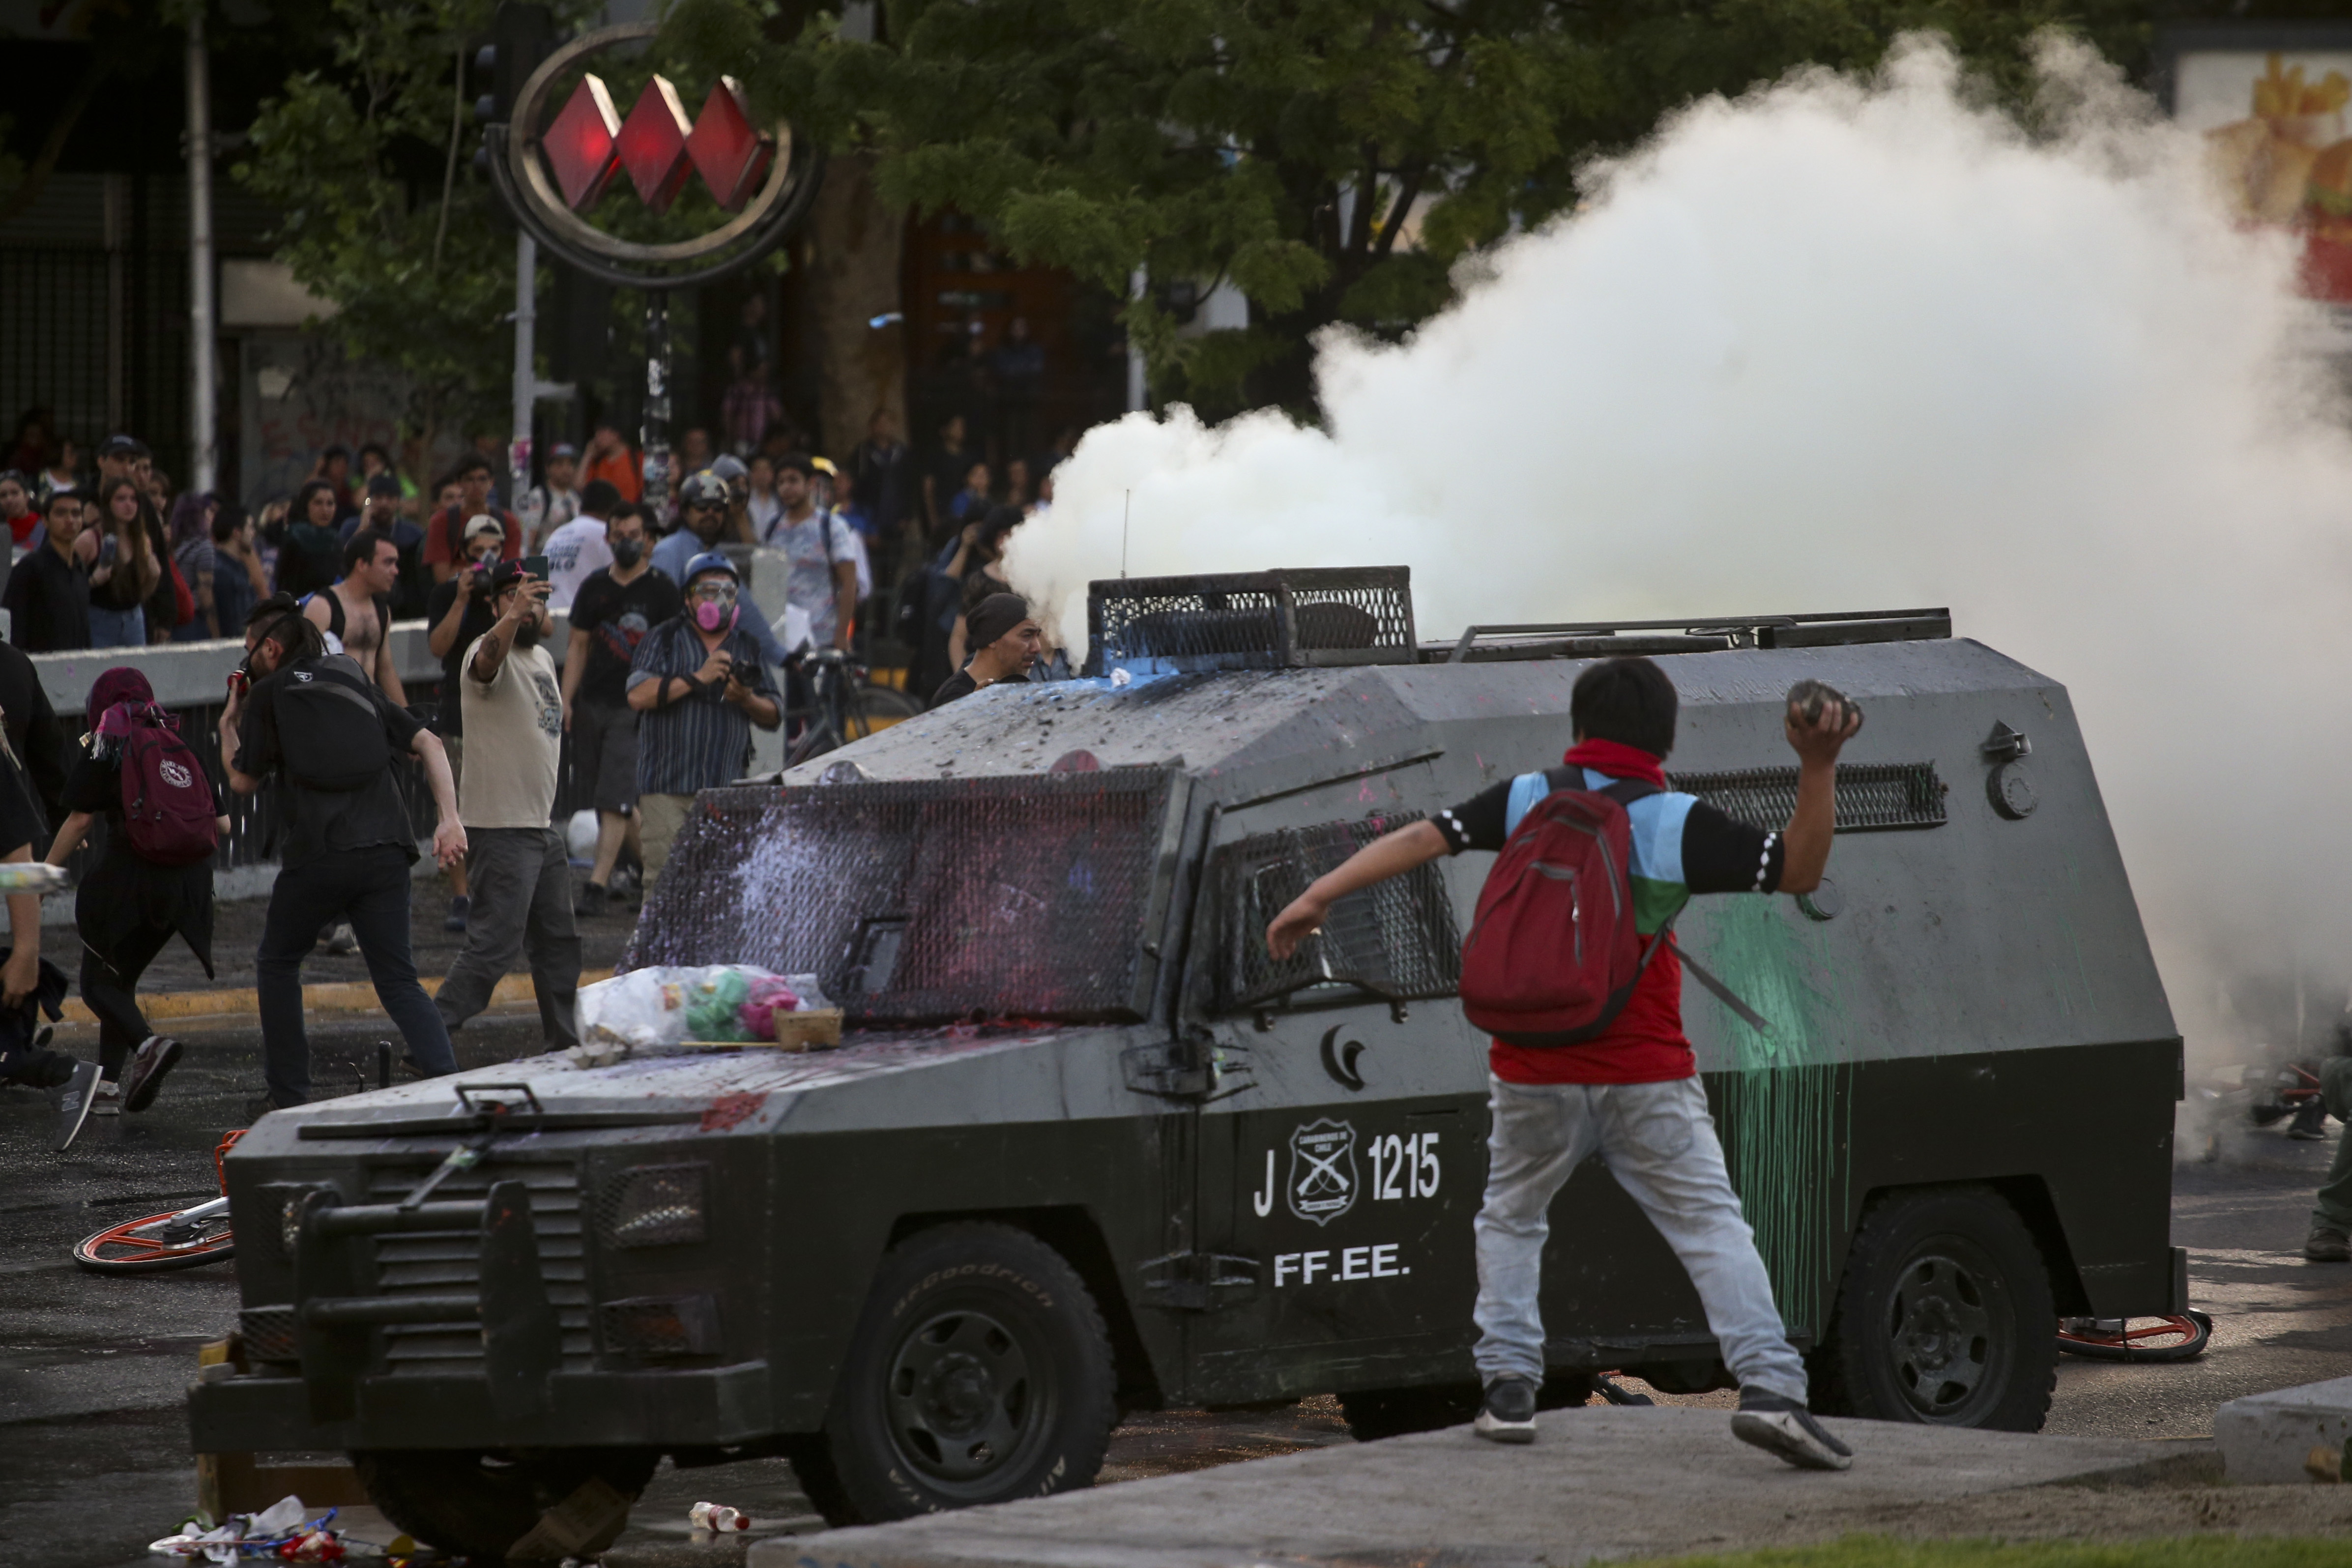 Demonstrators clash with police, after the death of Mapuche indigenous man Camilo Catrillanca during a police operation in La Araucania region of the country, in Santiago, Chile, Thursday, Nov. 15, 2018. The death of Catrillanca, shot in the head when the police was chasing unidentified car thieves, unleashed protests and violence in the troubled indigenous region of La Araucania, as well as in Santiago. (AP Photo/Esteban Felix)